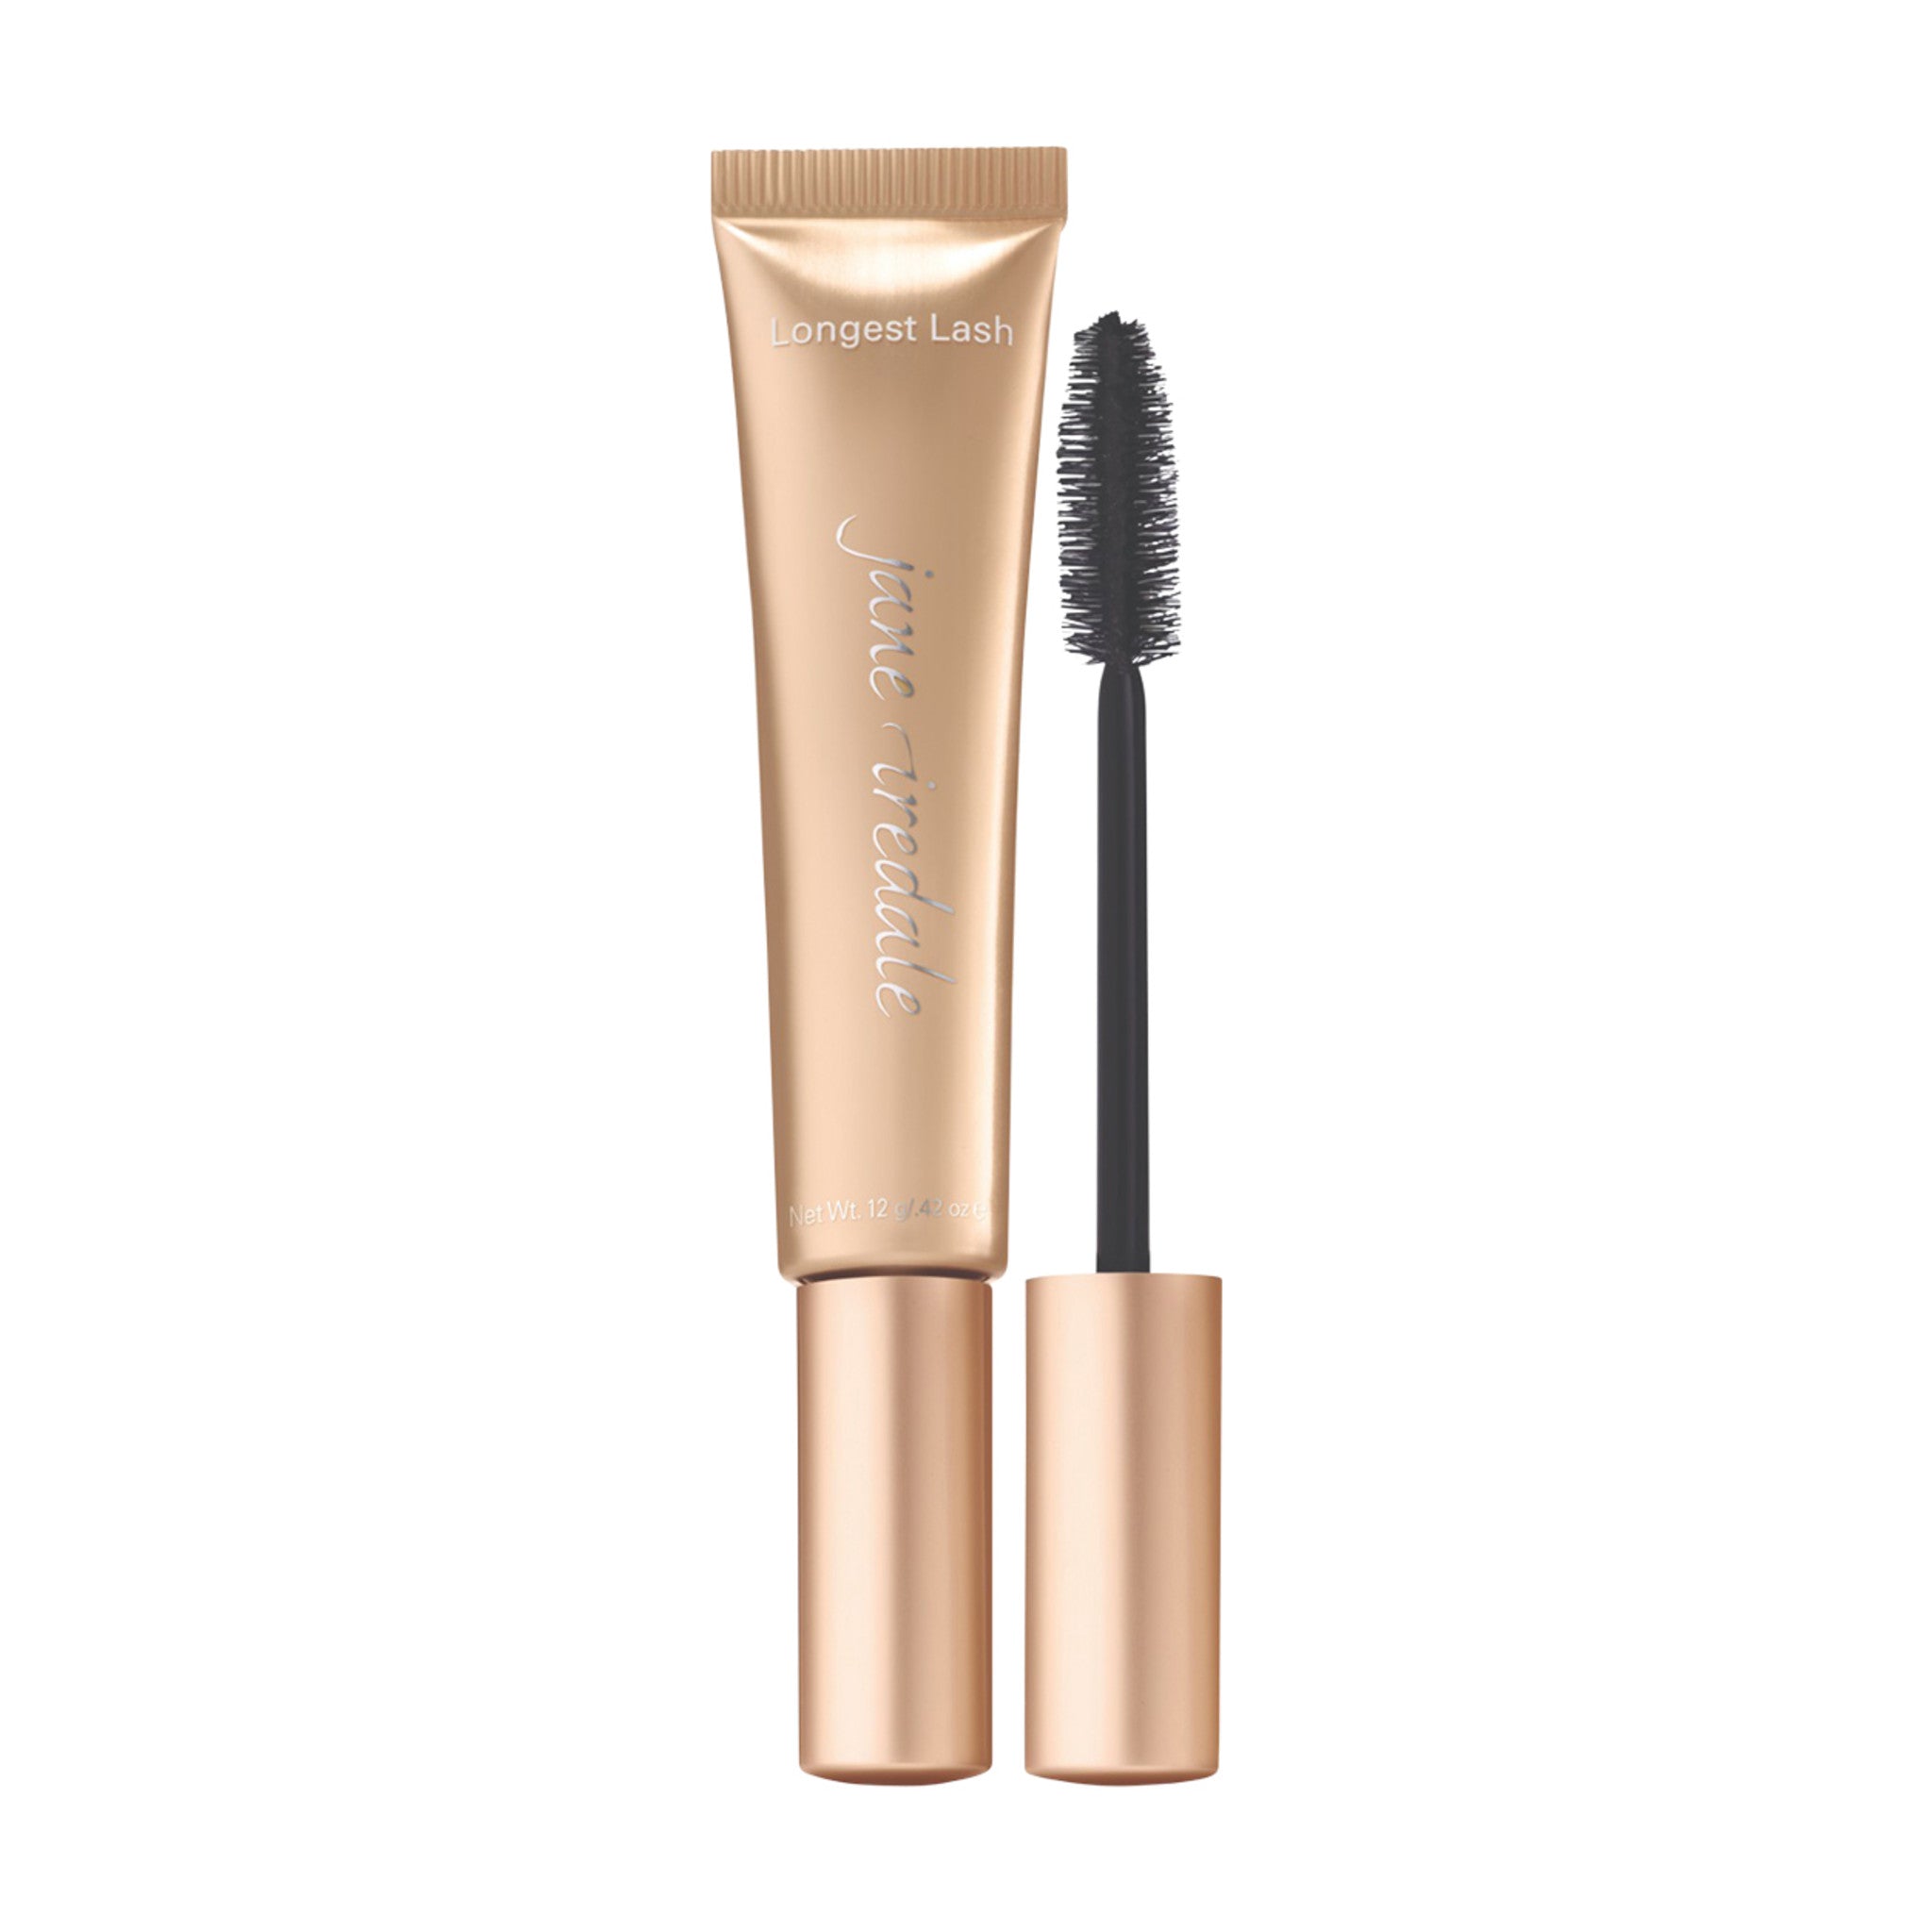 Jane Iredale Longest Lash Thickening and Lengthening Mascara Color/Shade variant: Black Ice main image. This product is in the color black